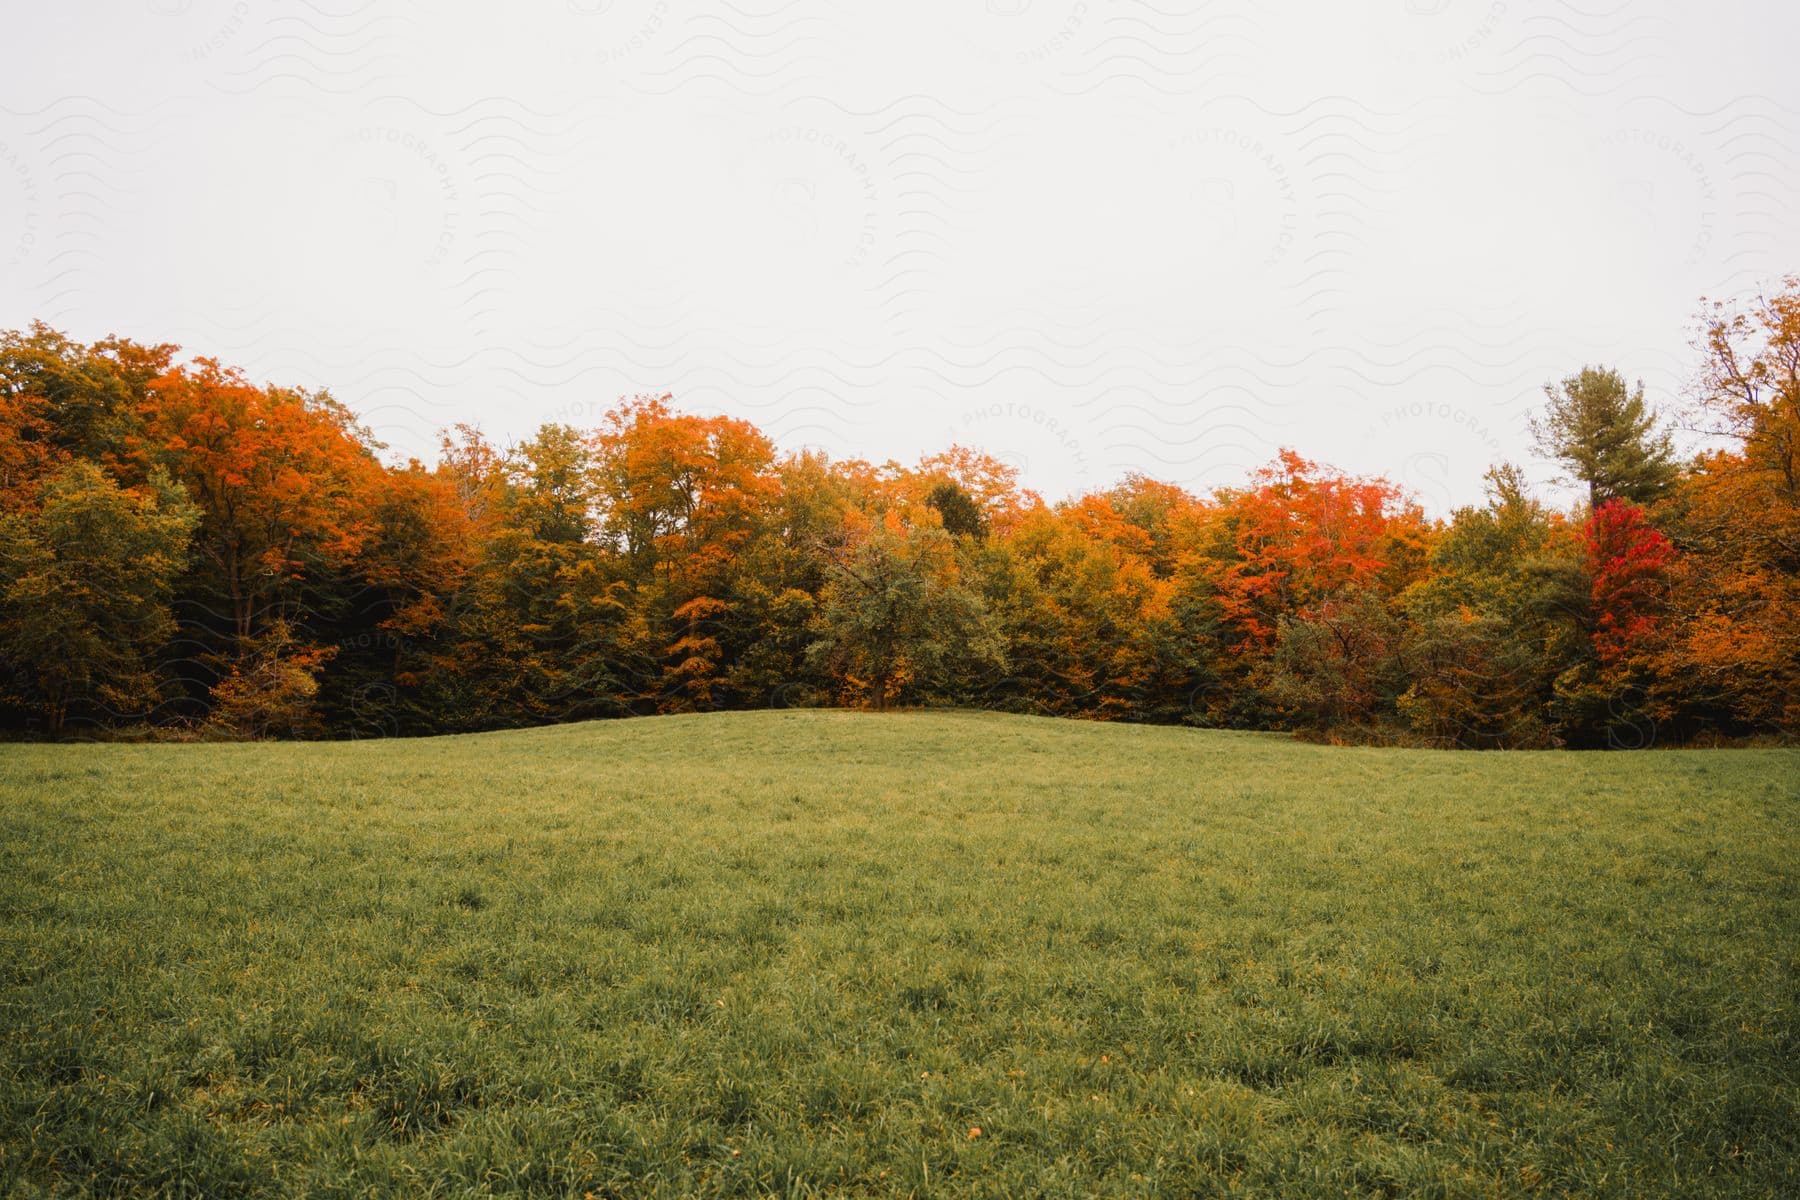 A large open grassy area edged with a thick lining of trees which there leaves are turning colors for fall.